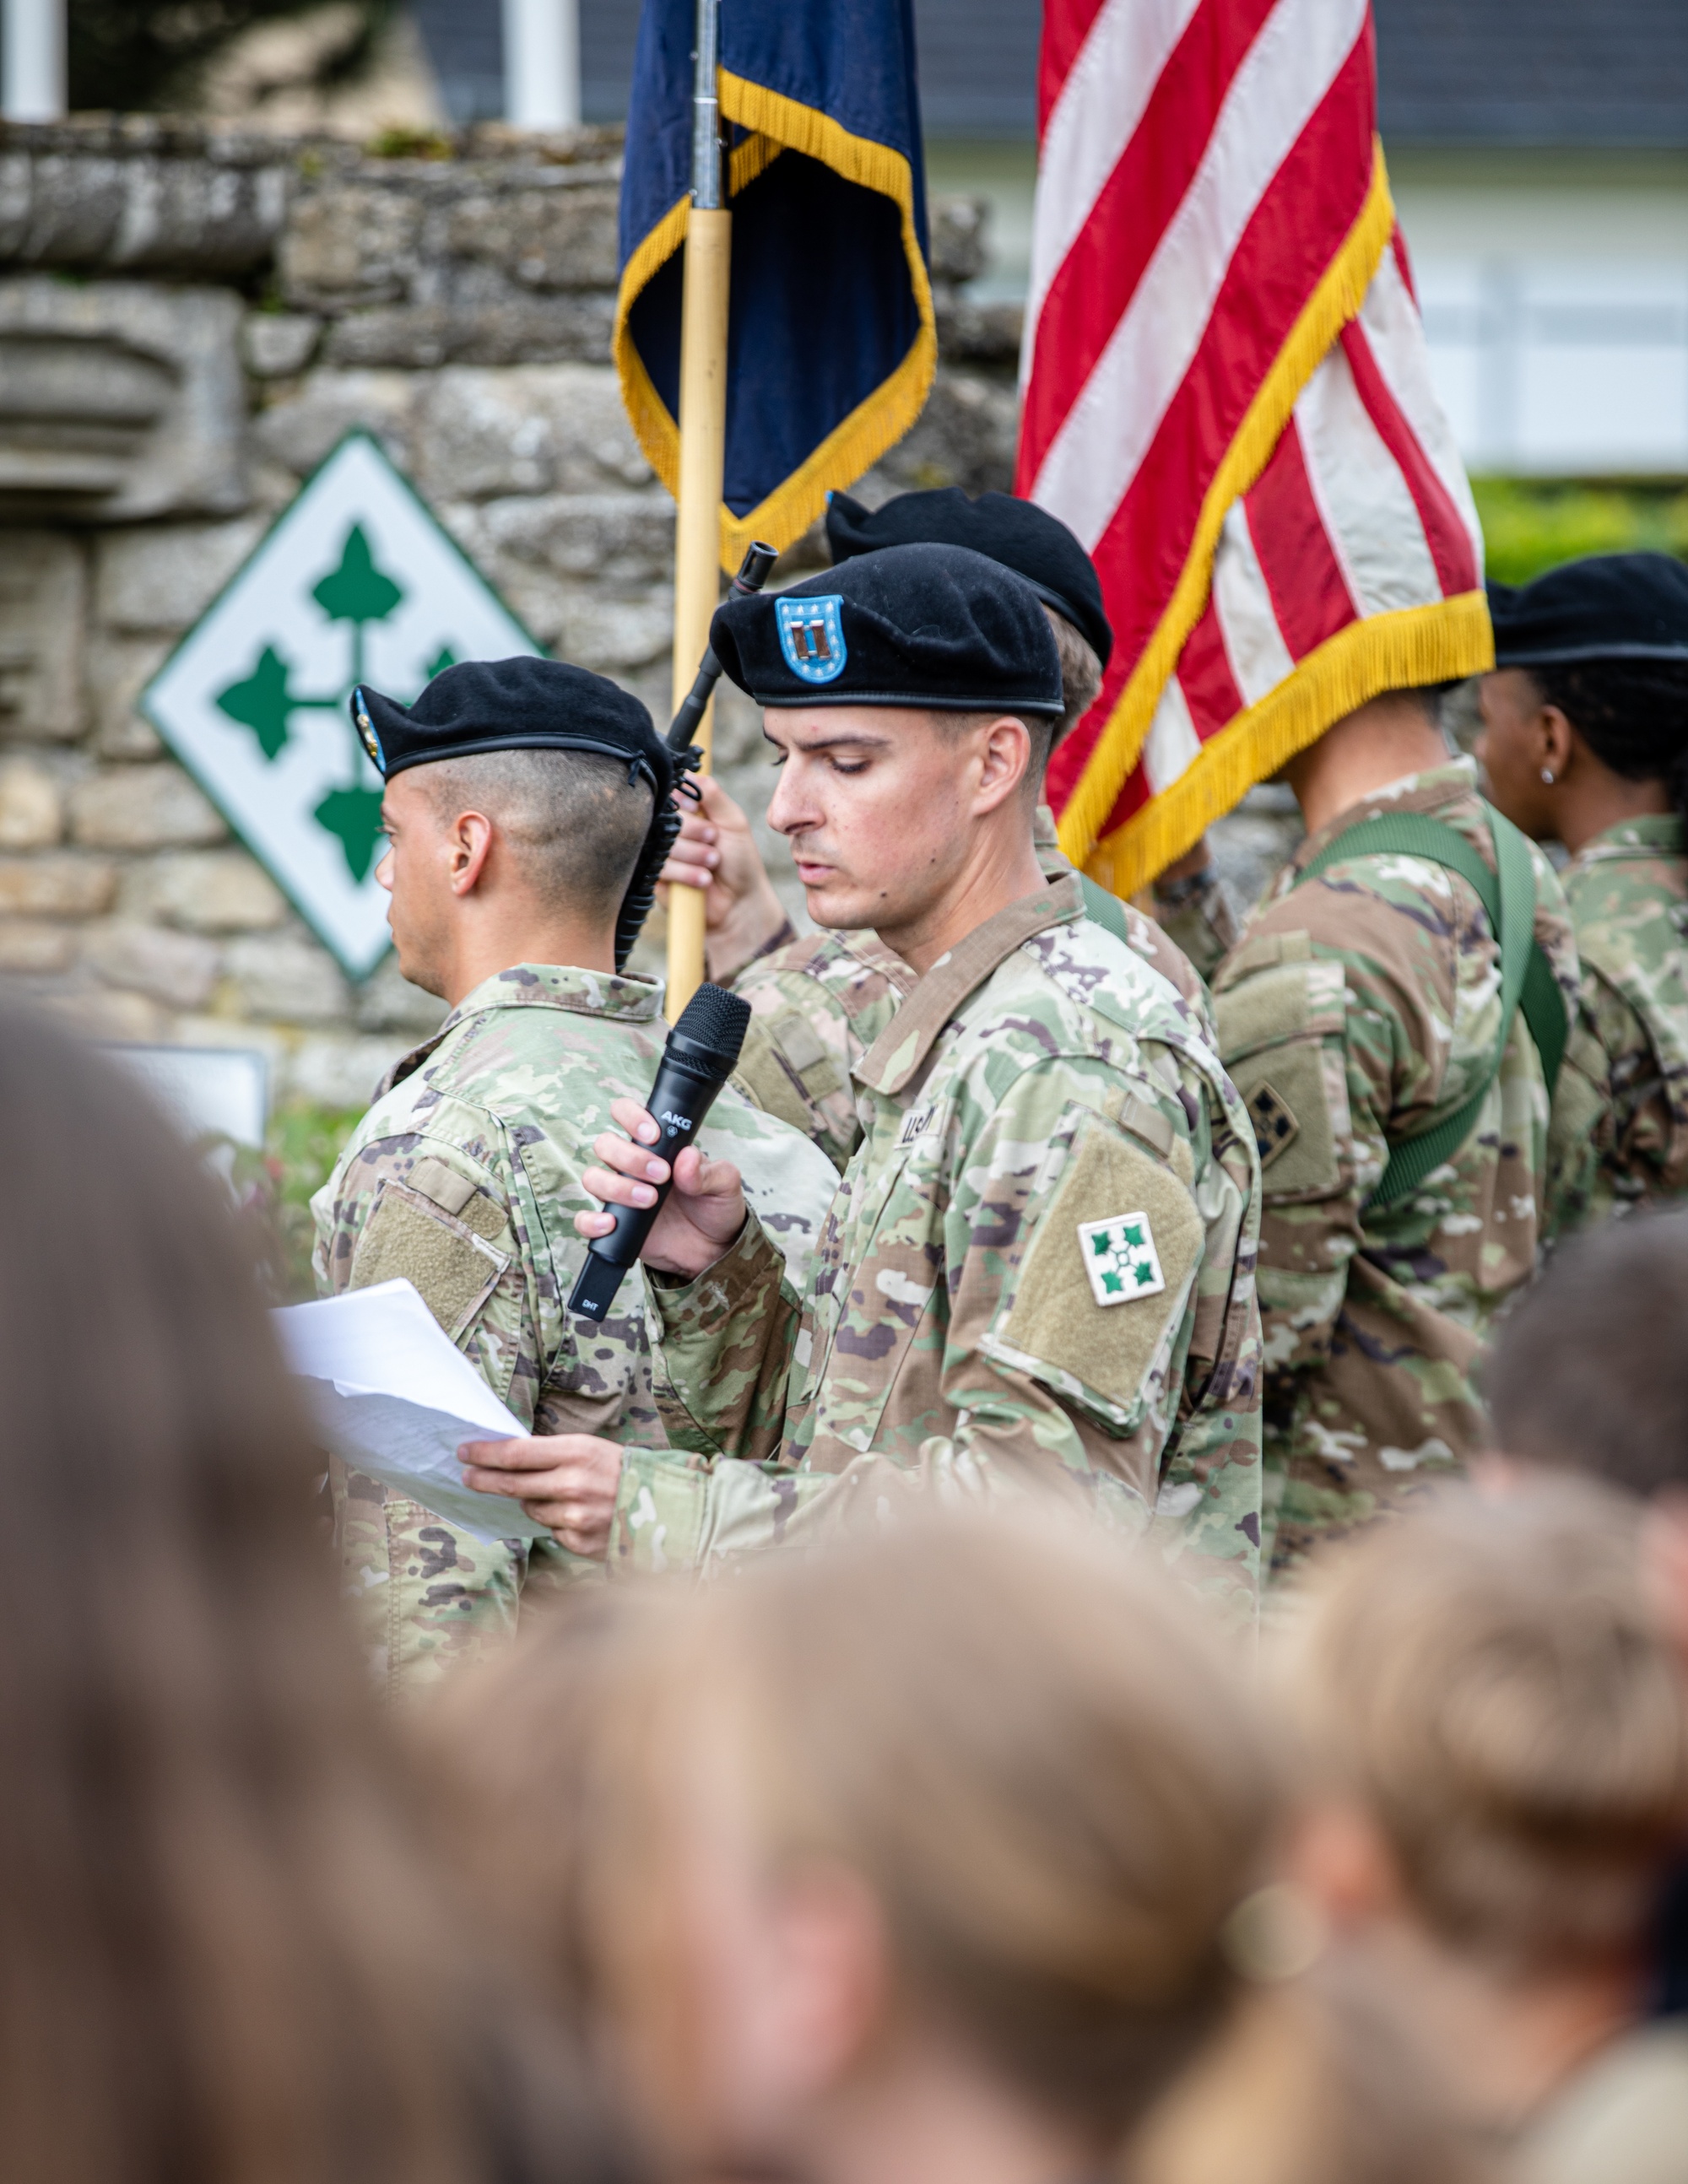 DVIDS - Images - DDay 78th Anniversary: 4th Infantry Division honored in  WWII commemoration [Image 4 of 10]